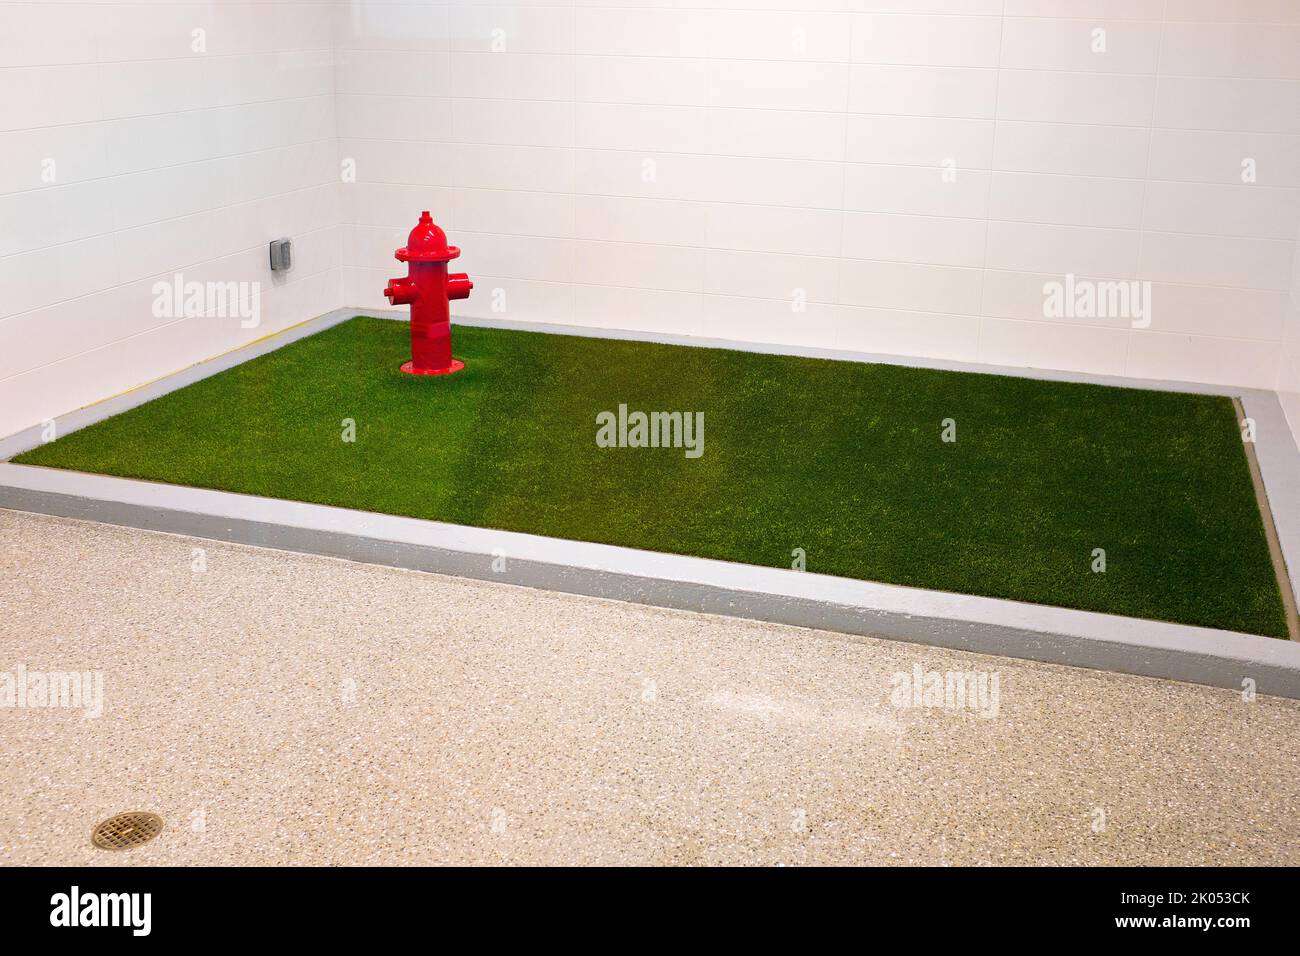 Designated Public Pet Relief Area with Artificial Grass and Fire Hydrant, Logan International Airport, Boston, Massachusetts, USA Stock Photo